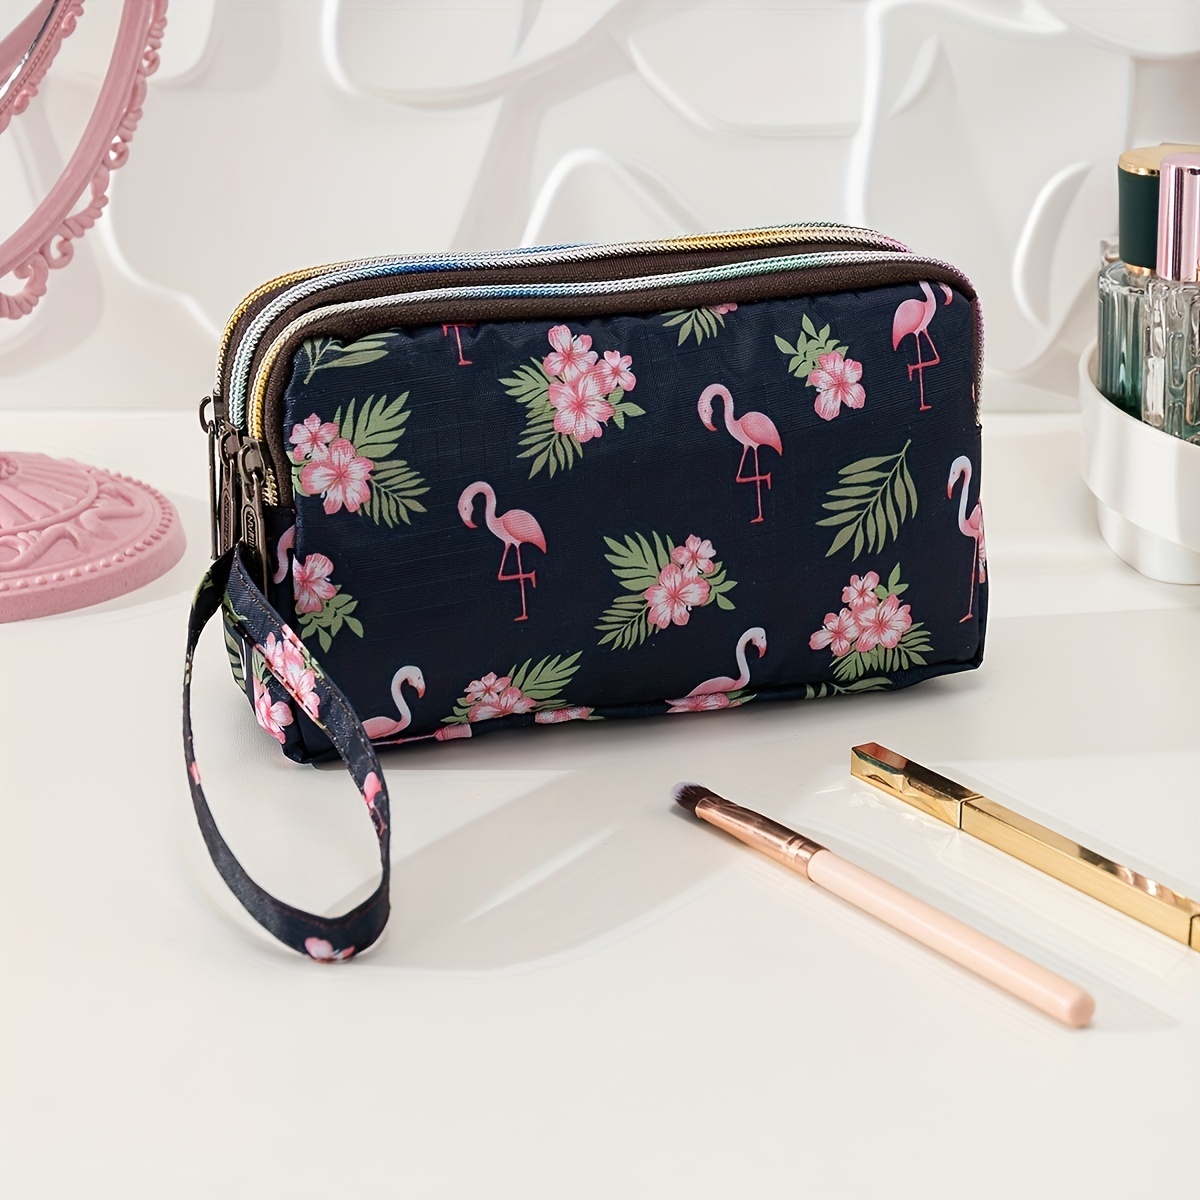 

Tropical & Flamingo Print Long Wallet With 3 Zippers Roomy Elegant Makeup Pouch Bag, Travel Portable Cosmetic Accessories Organizer For Women Gift